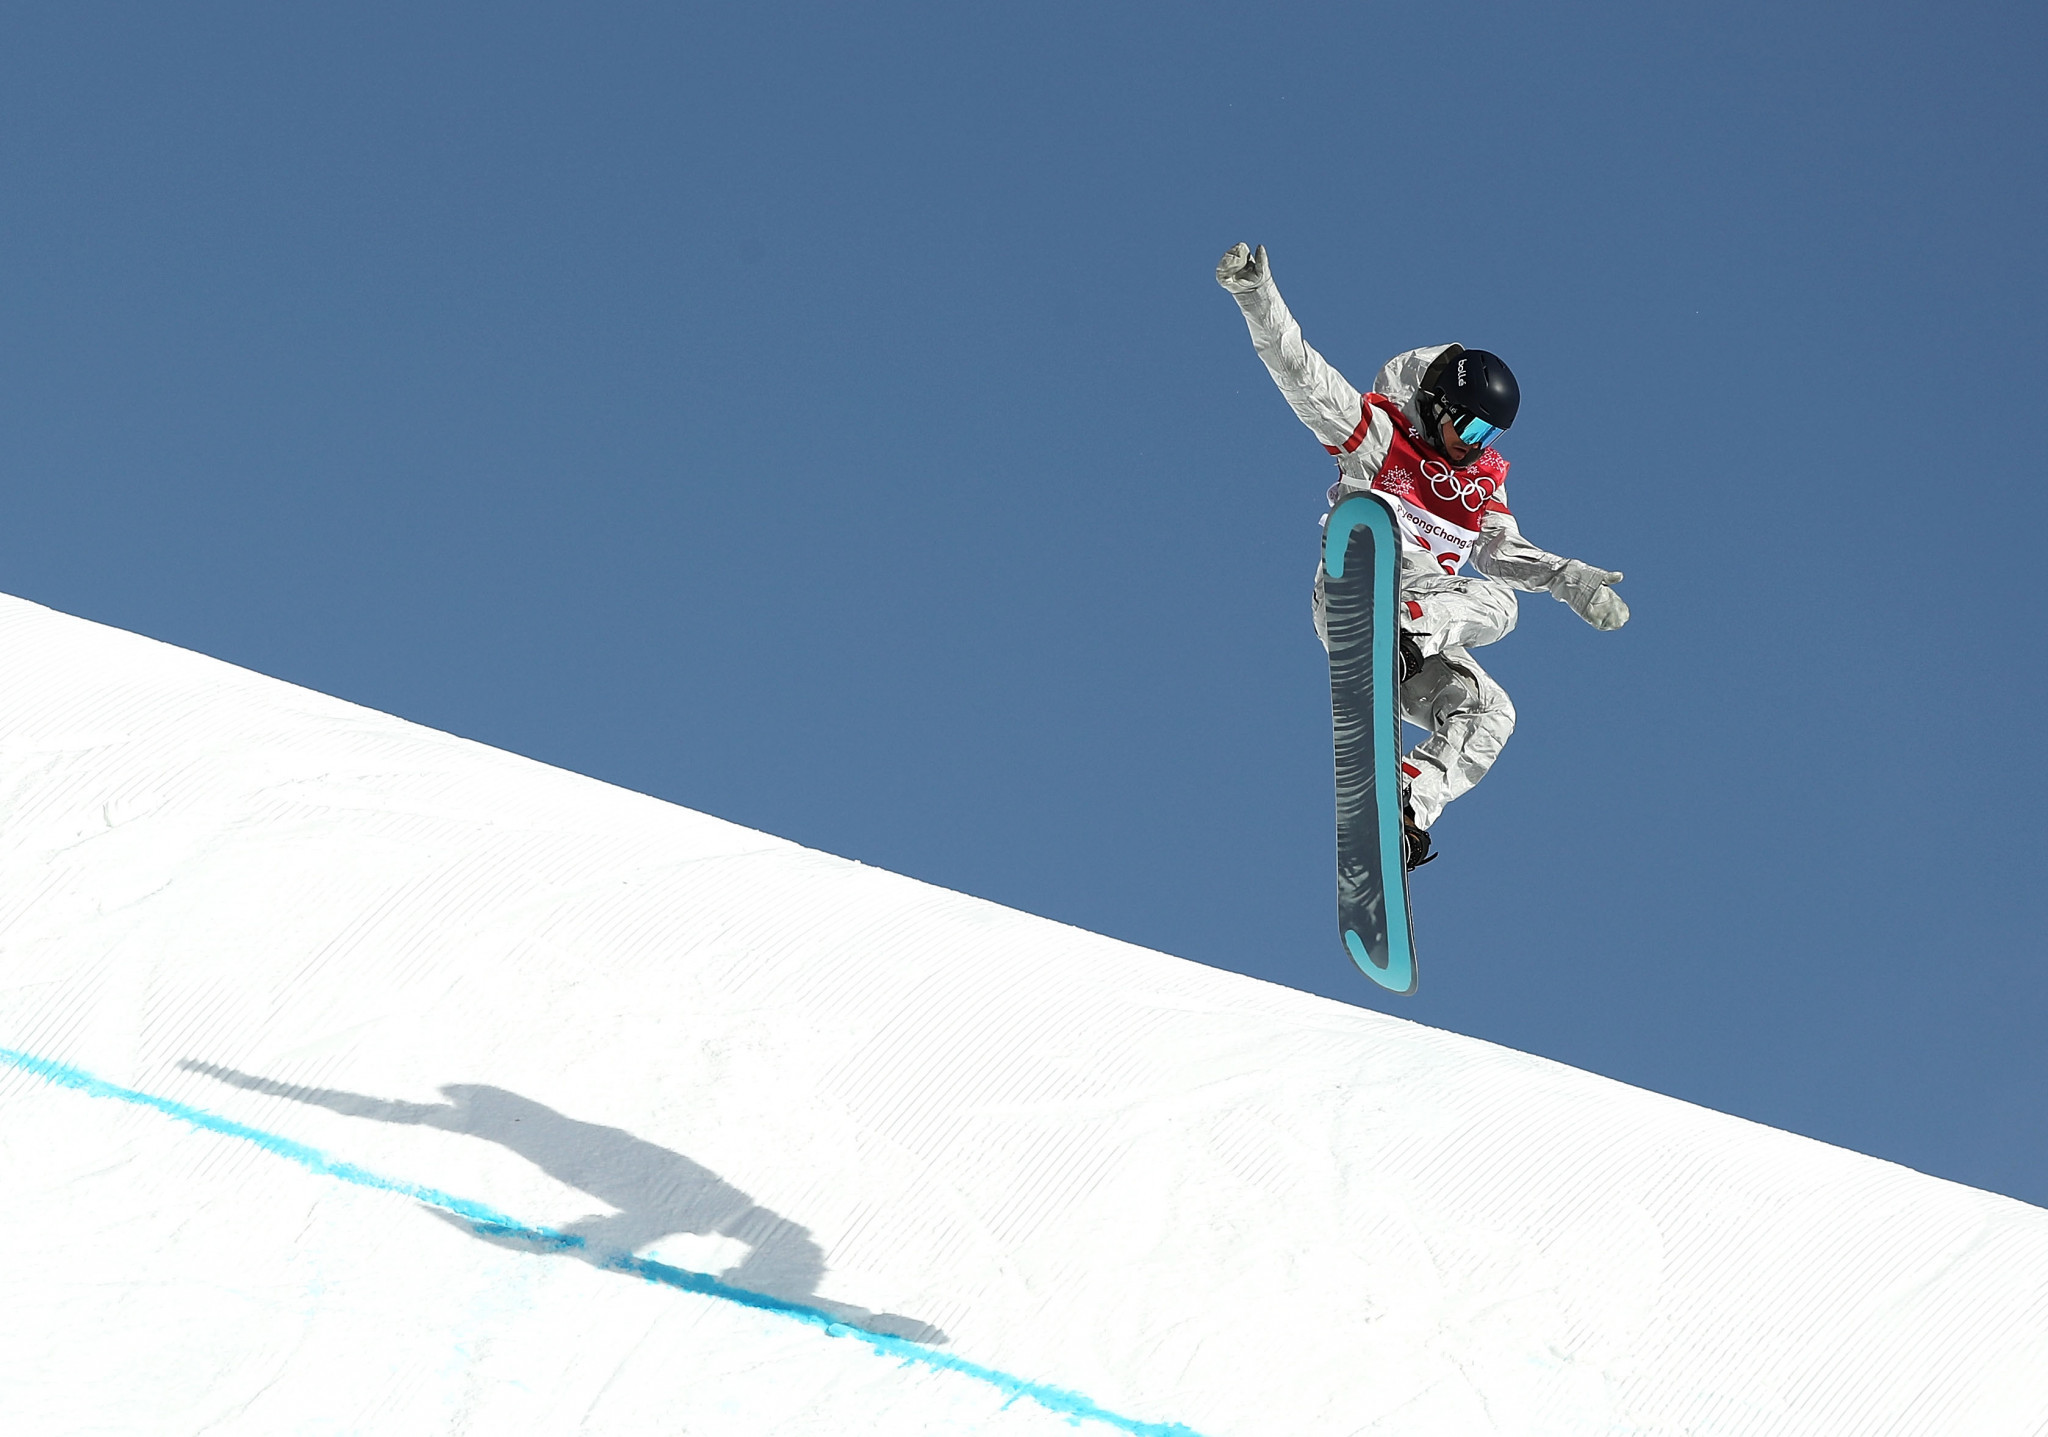 Beijing 2022 slopestyle course receives praise following test event